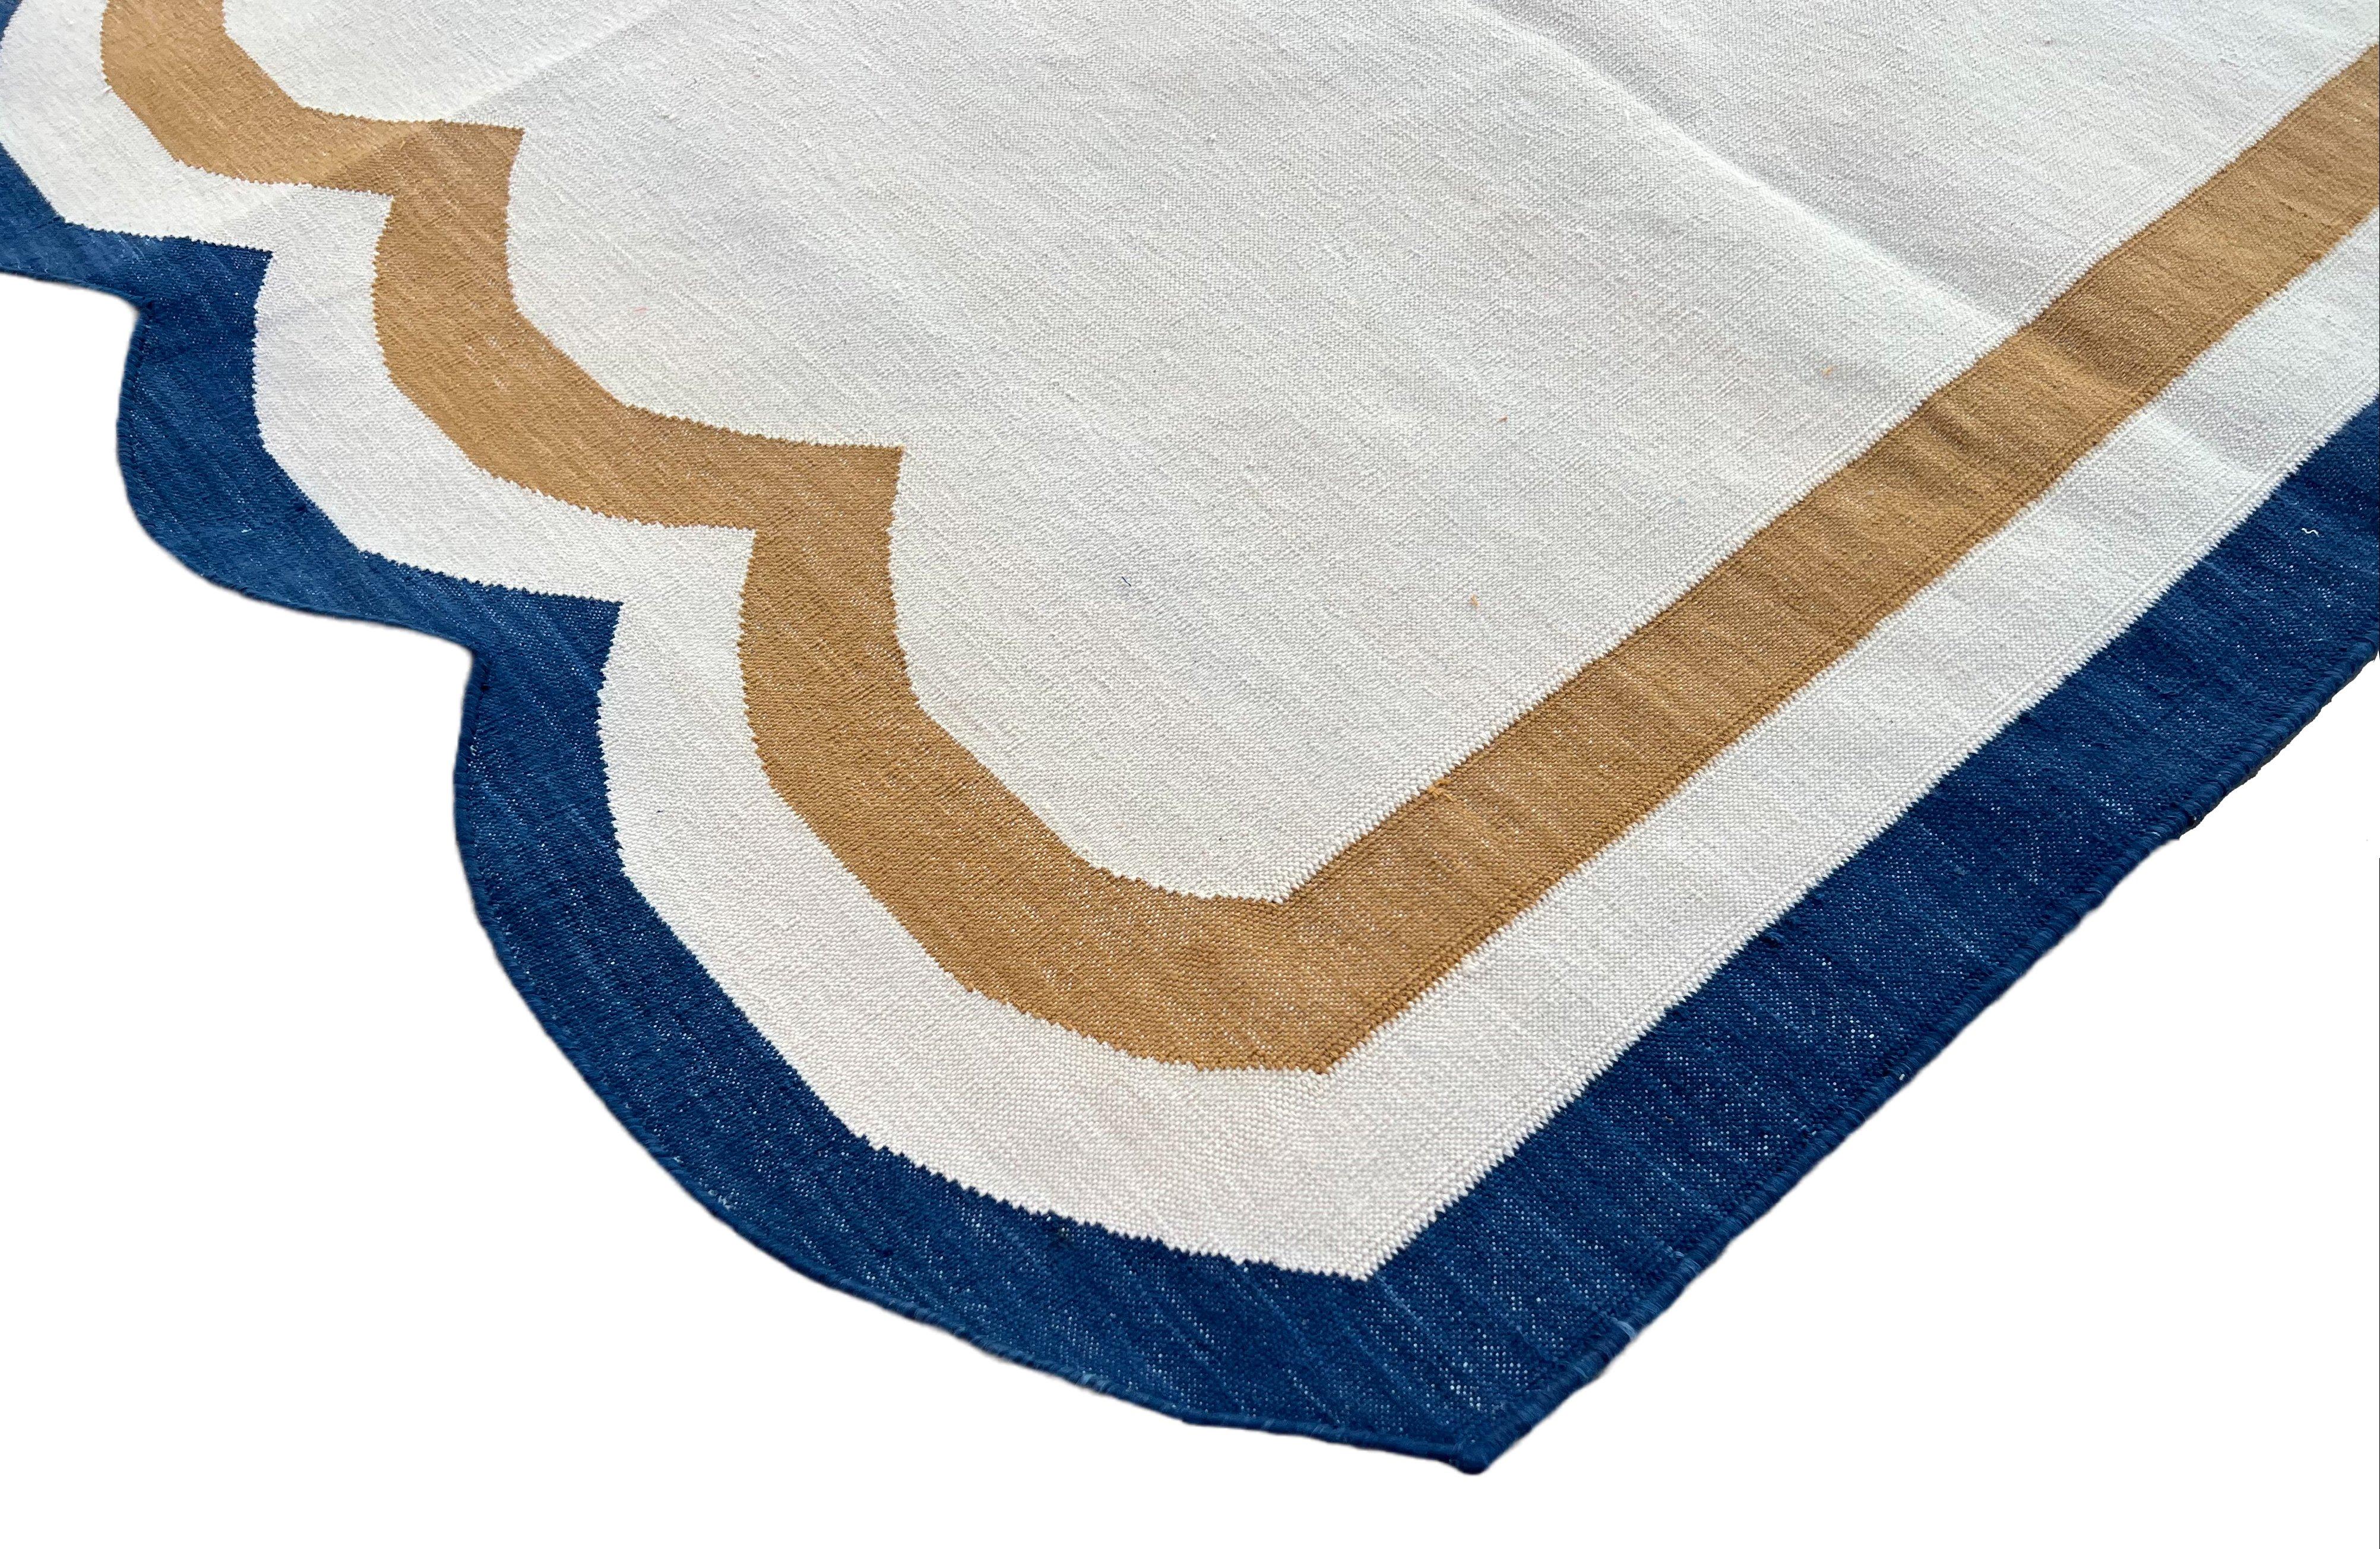 Mid-Century Modern Handmade Cotton Area Flat Weave Rug, 8x10 Cream And Blue Scallop Striped Dhurrie For Sale